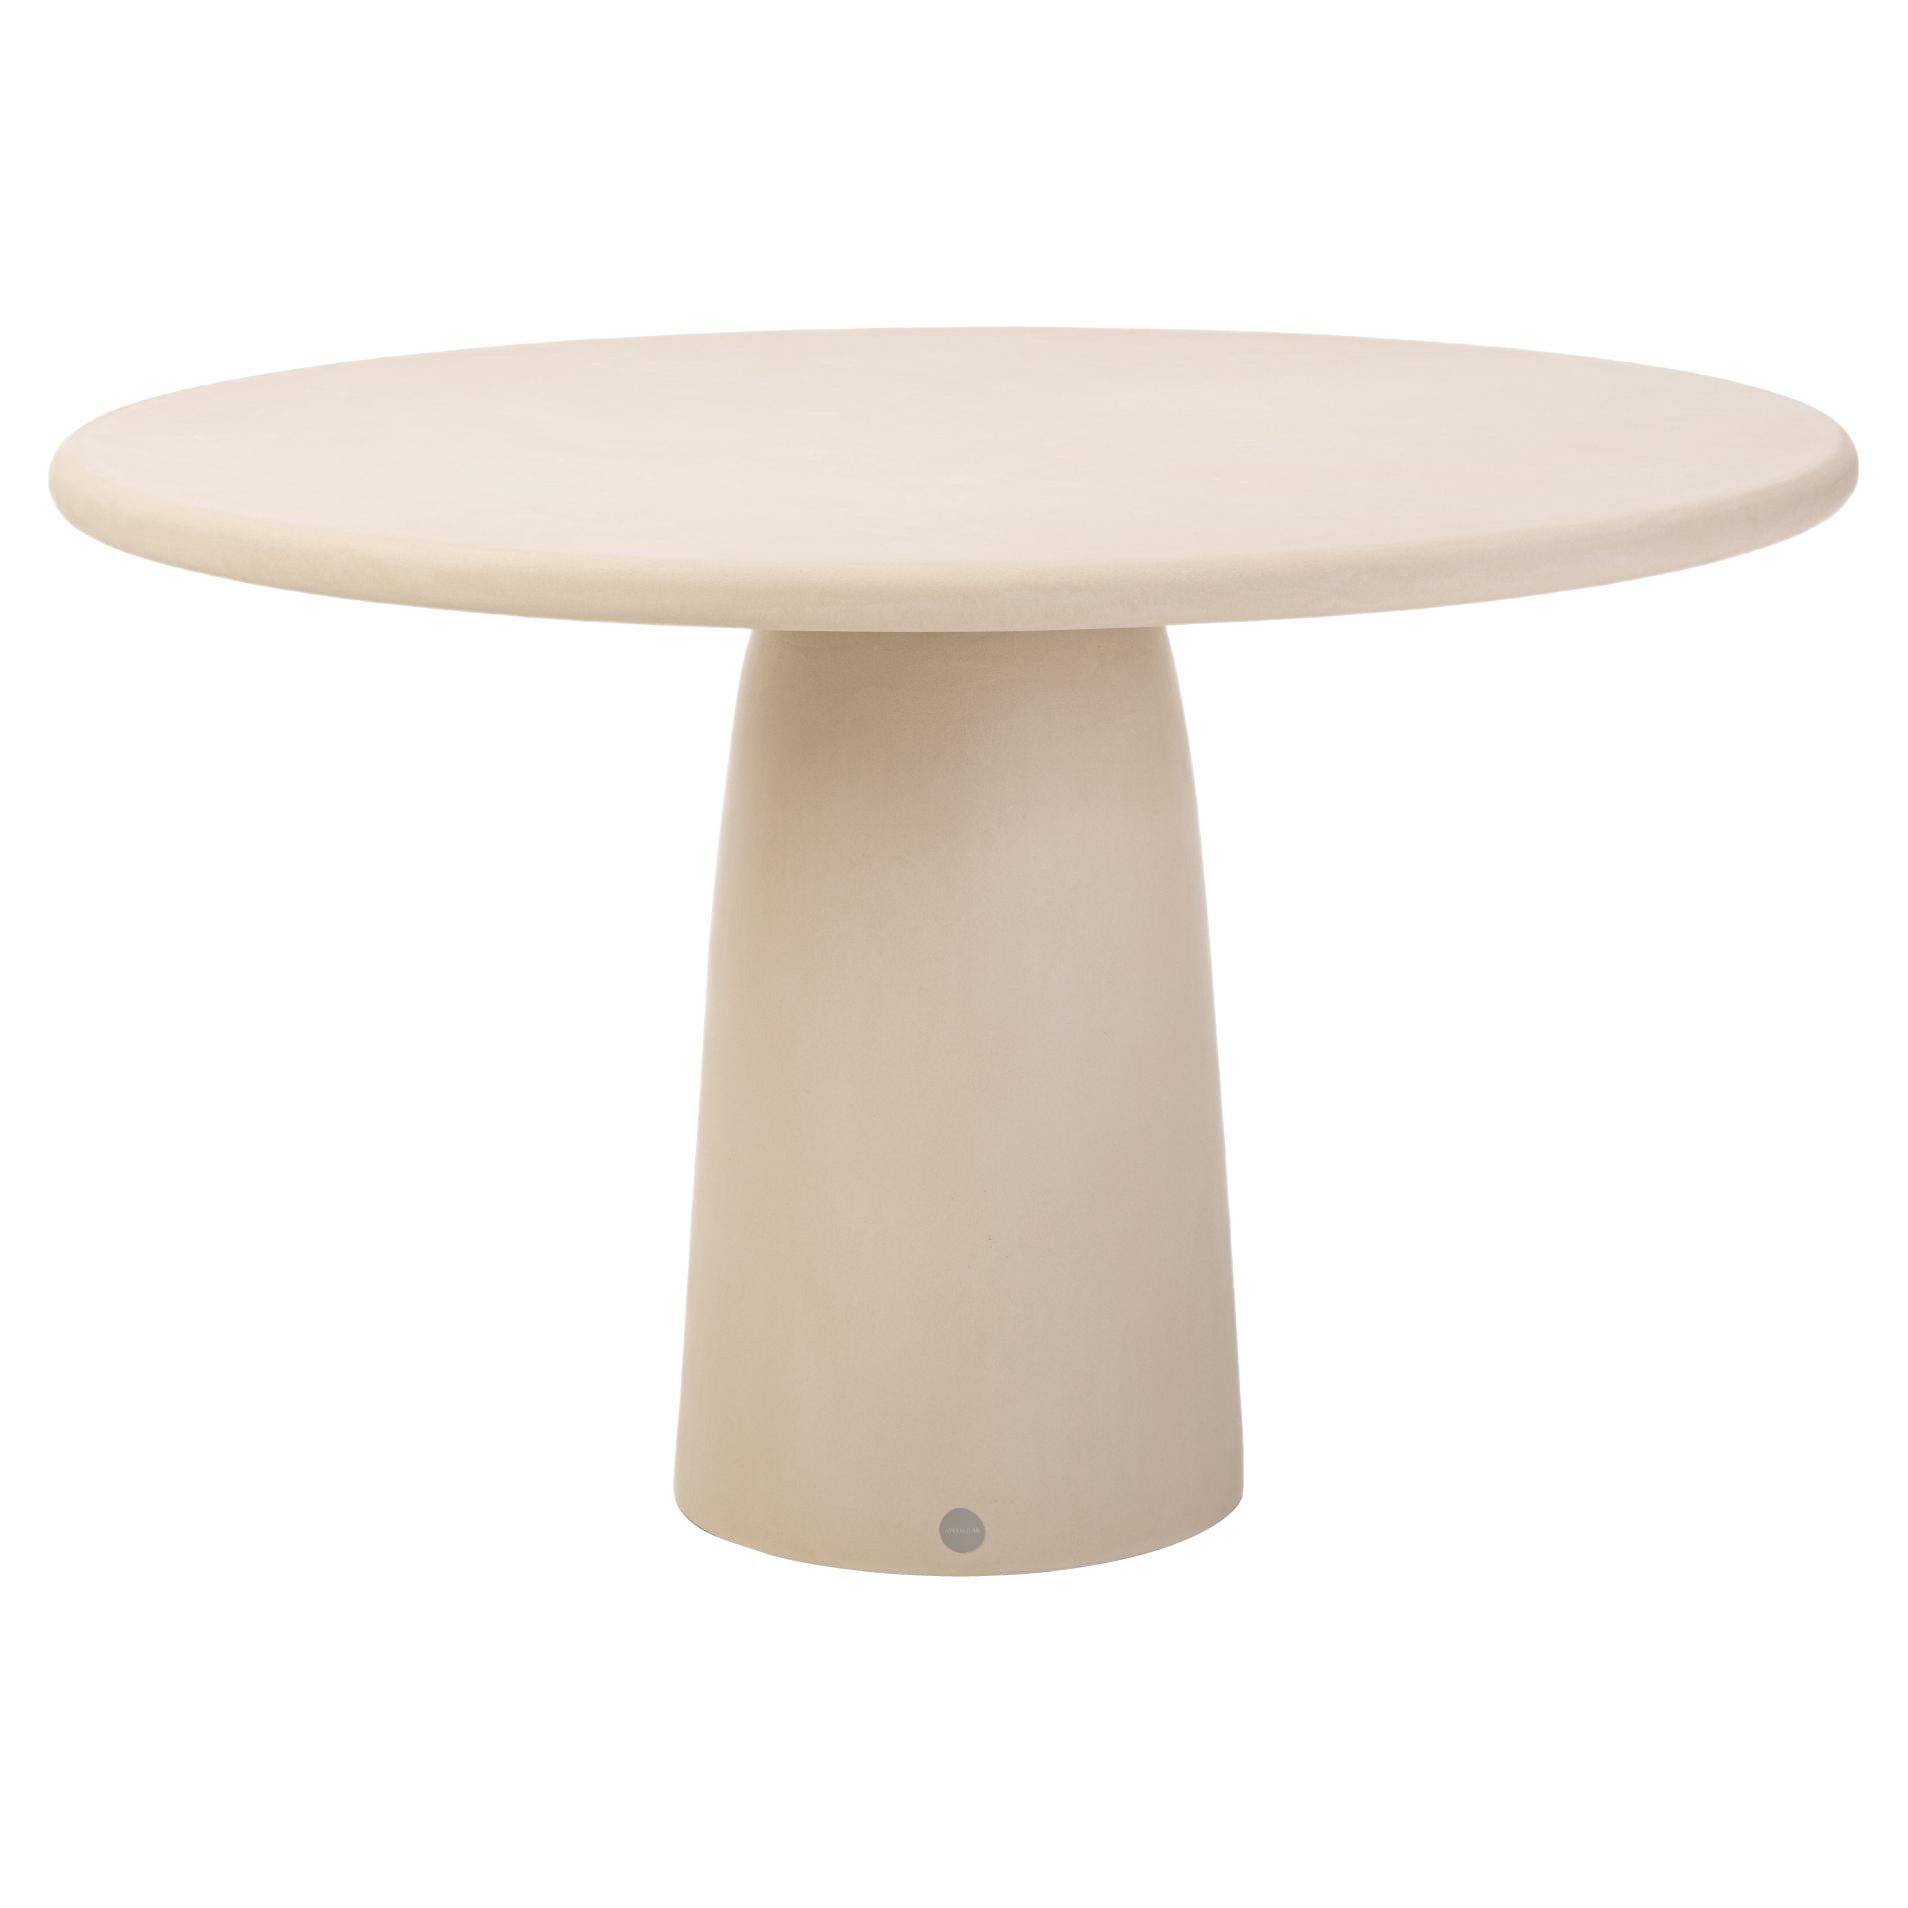 Contemporary Round Natural Plaster "Menhir" Table 160cm by Isabelle Beaumont For Sale